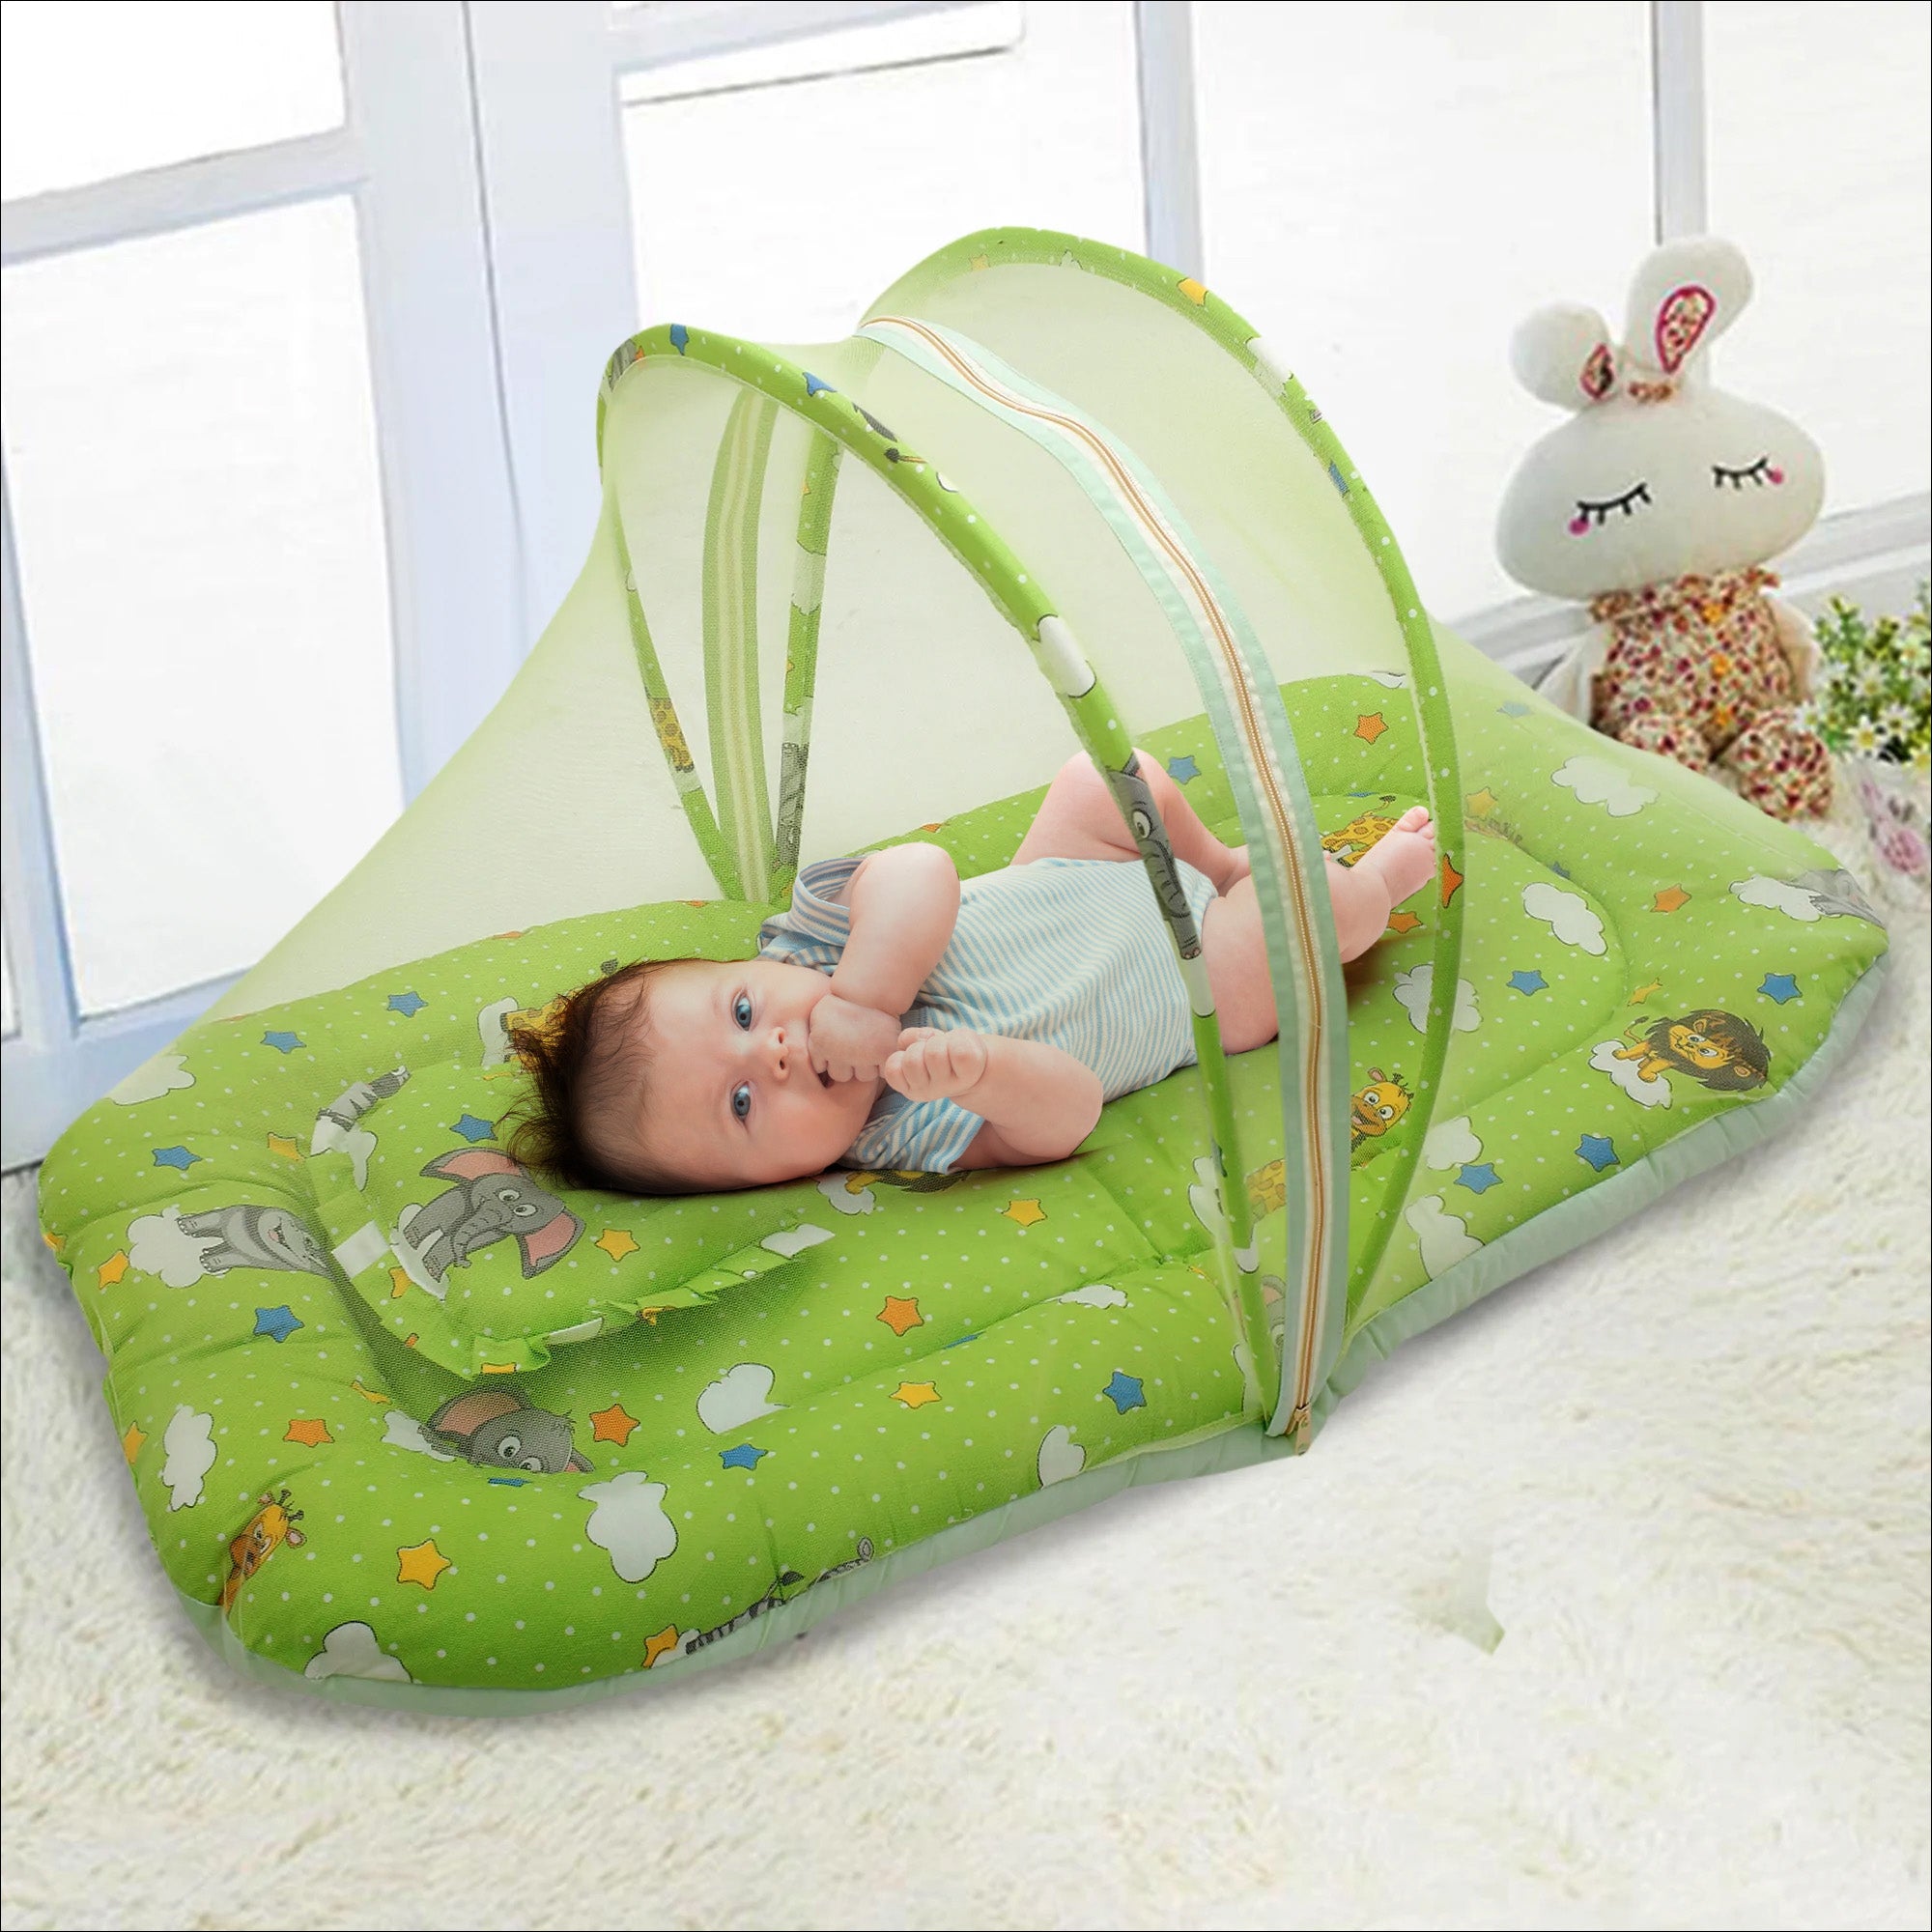 Mosquito Net Tent Mattress Set With Neck Pillow Fun In The Jungle Green